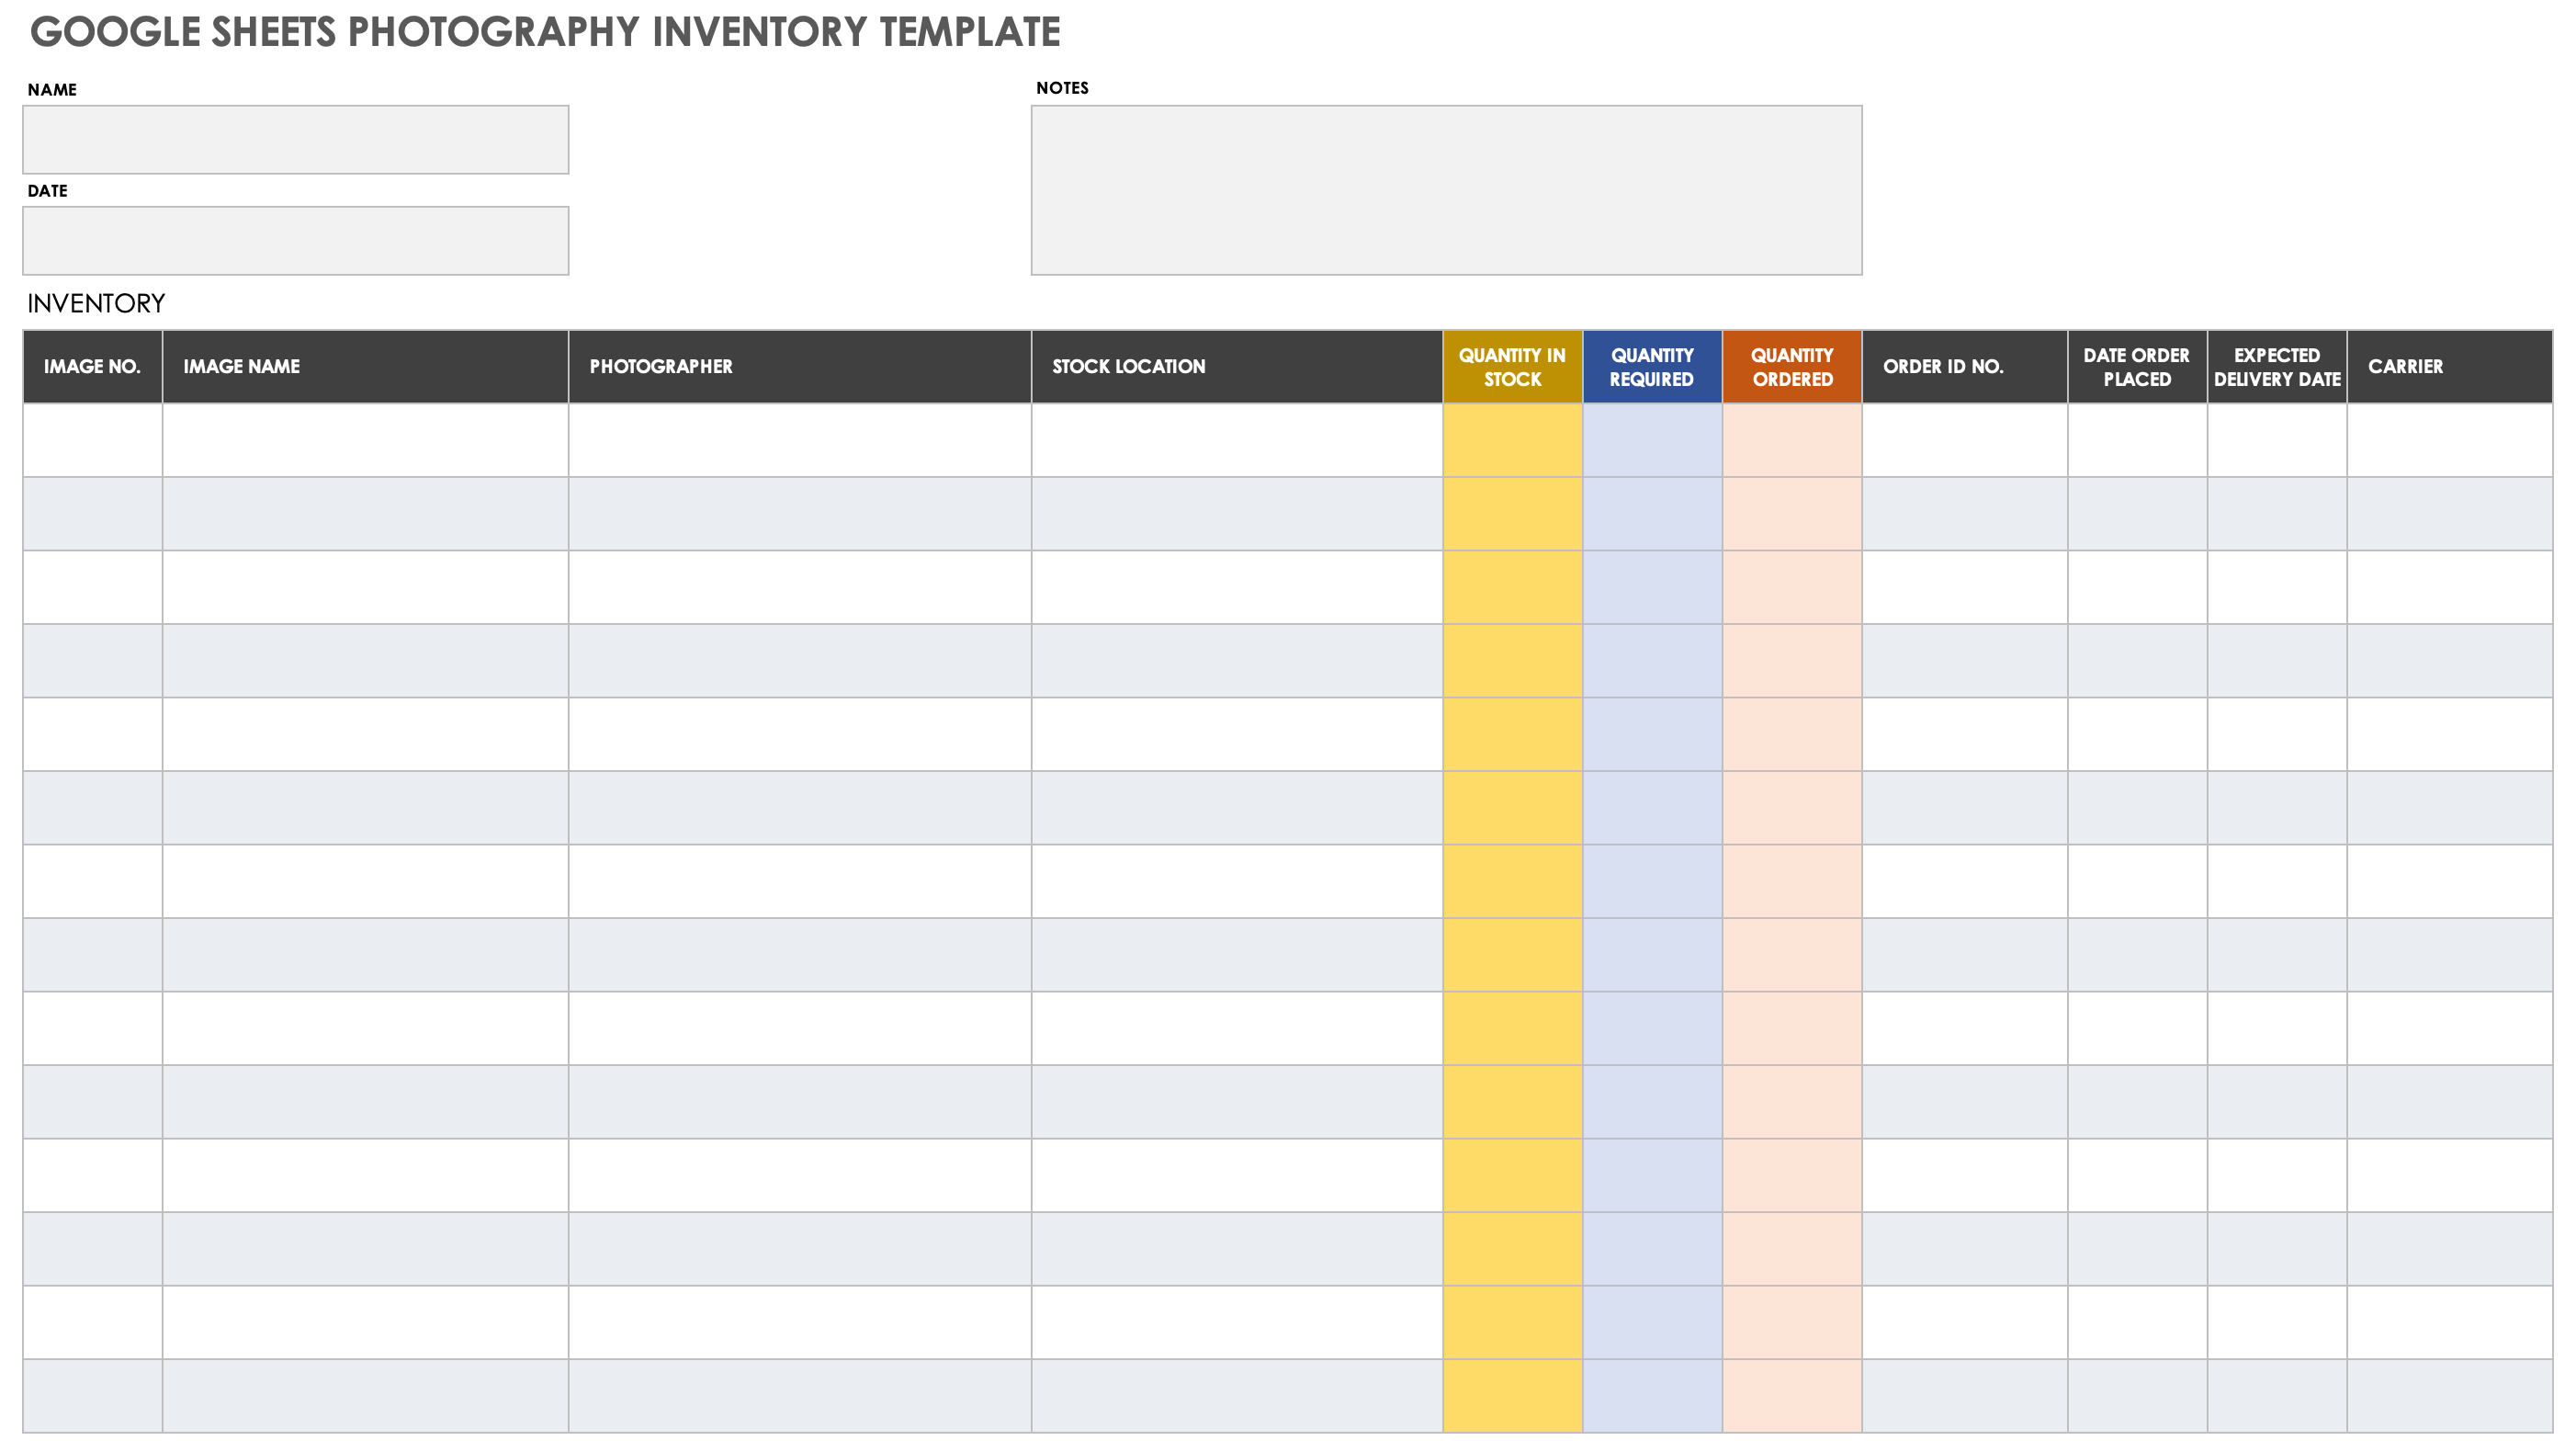 Google Sheets Photography Inventory Template